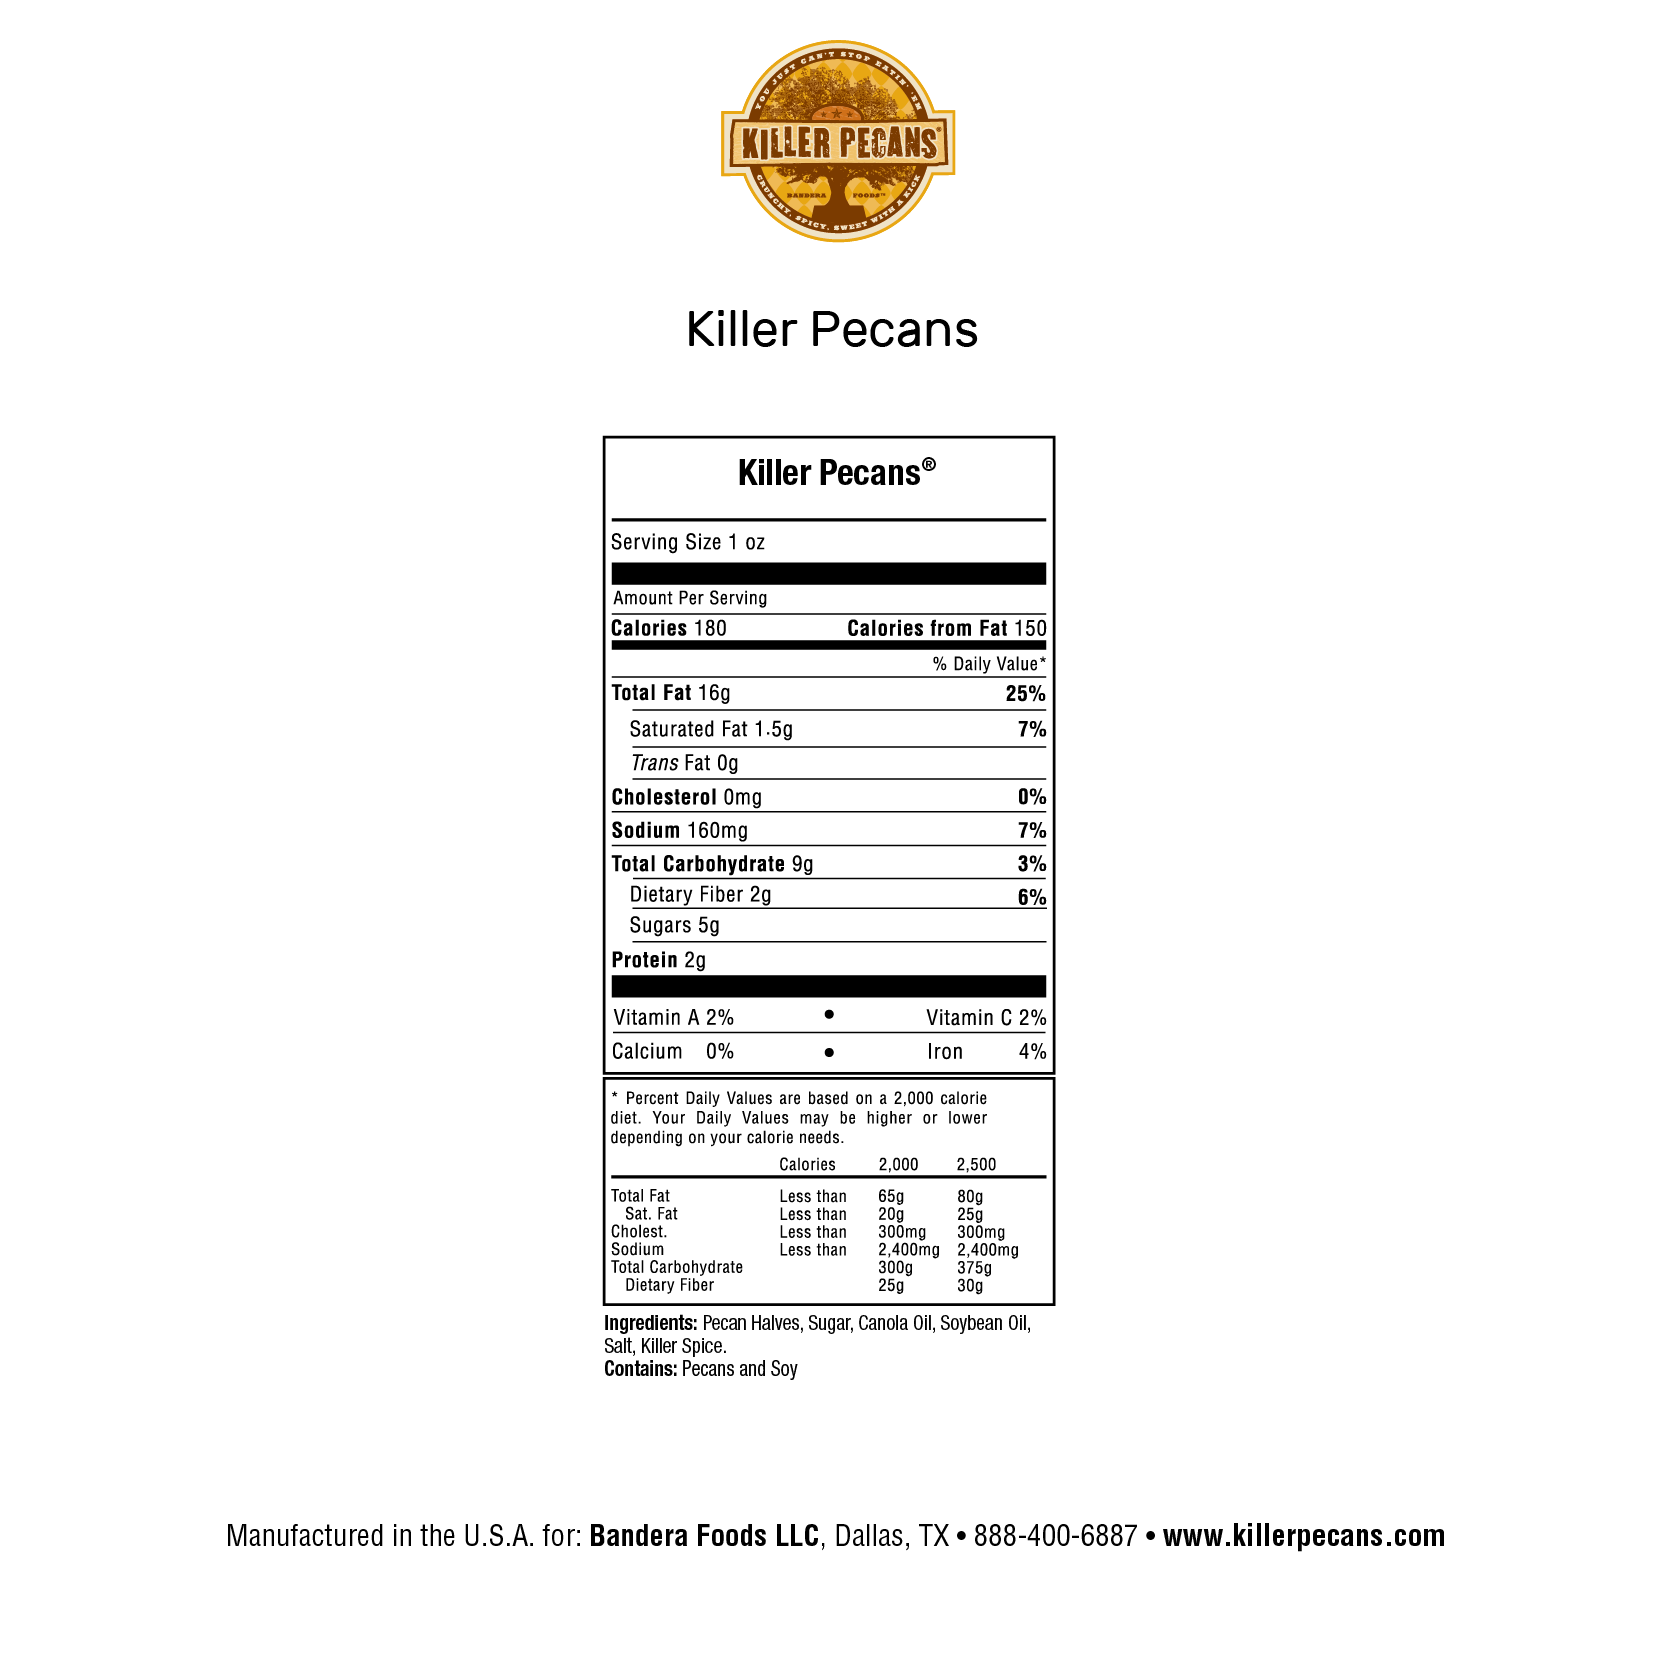 Killer Pecans 8oz bag Crunchy Spicy Sweet with a Kick. All Natural, Gluten-free. Nutrition Panel